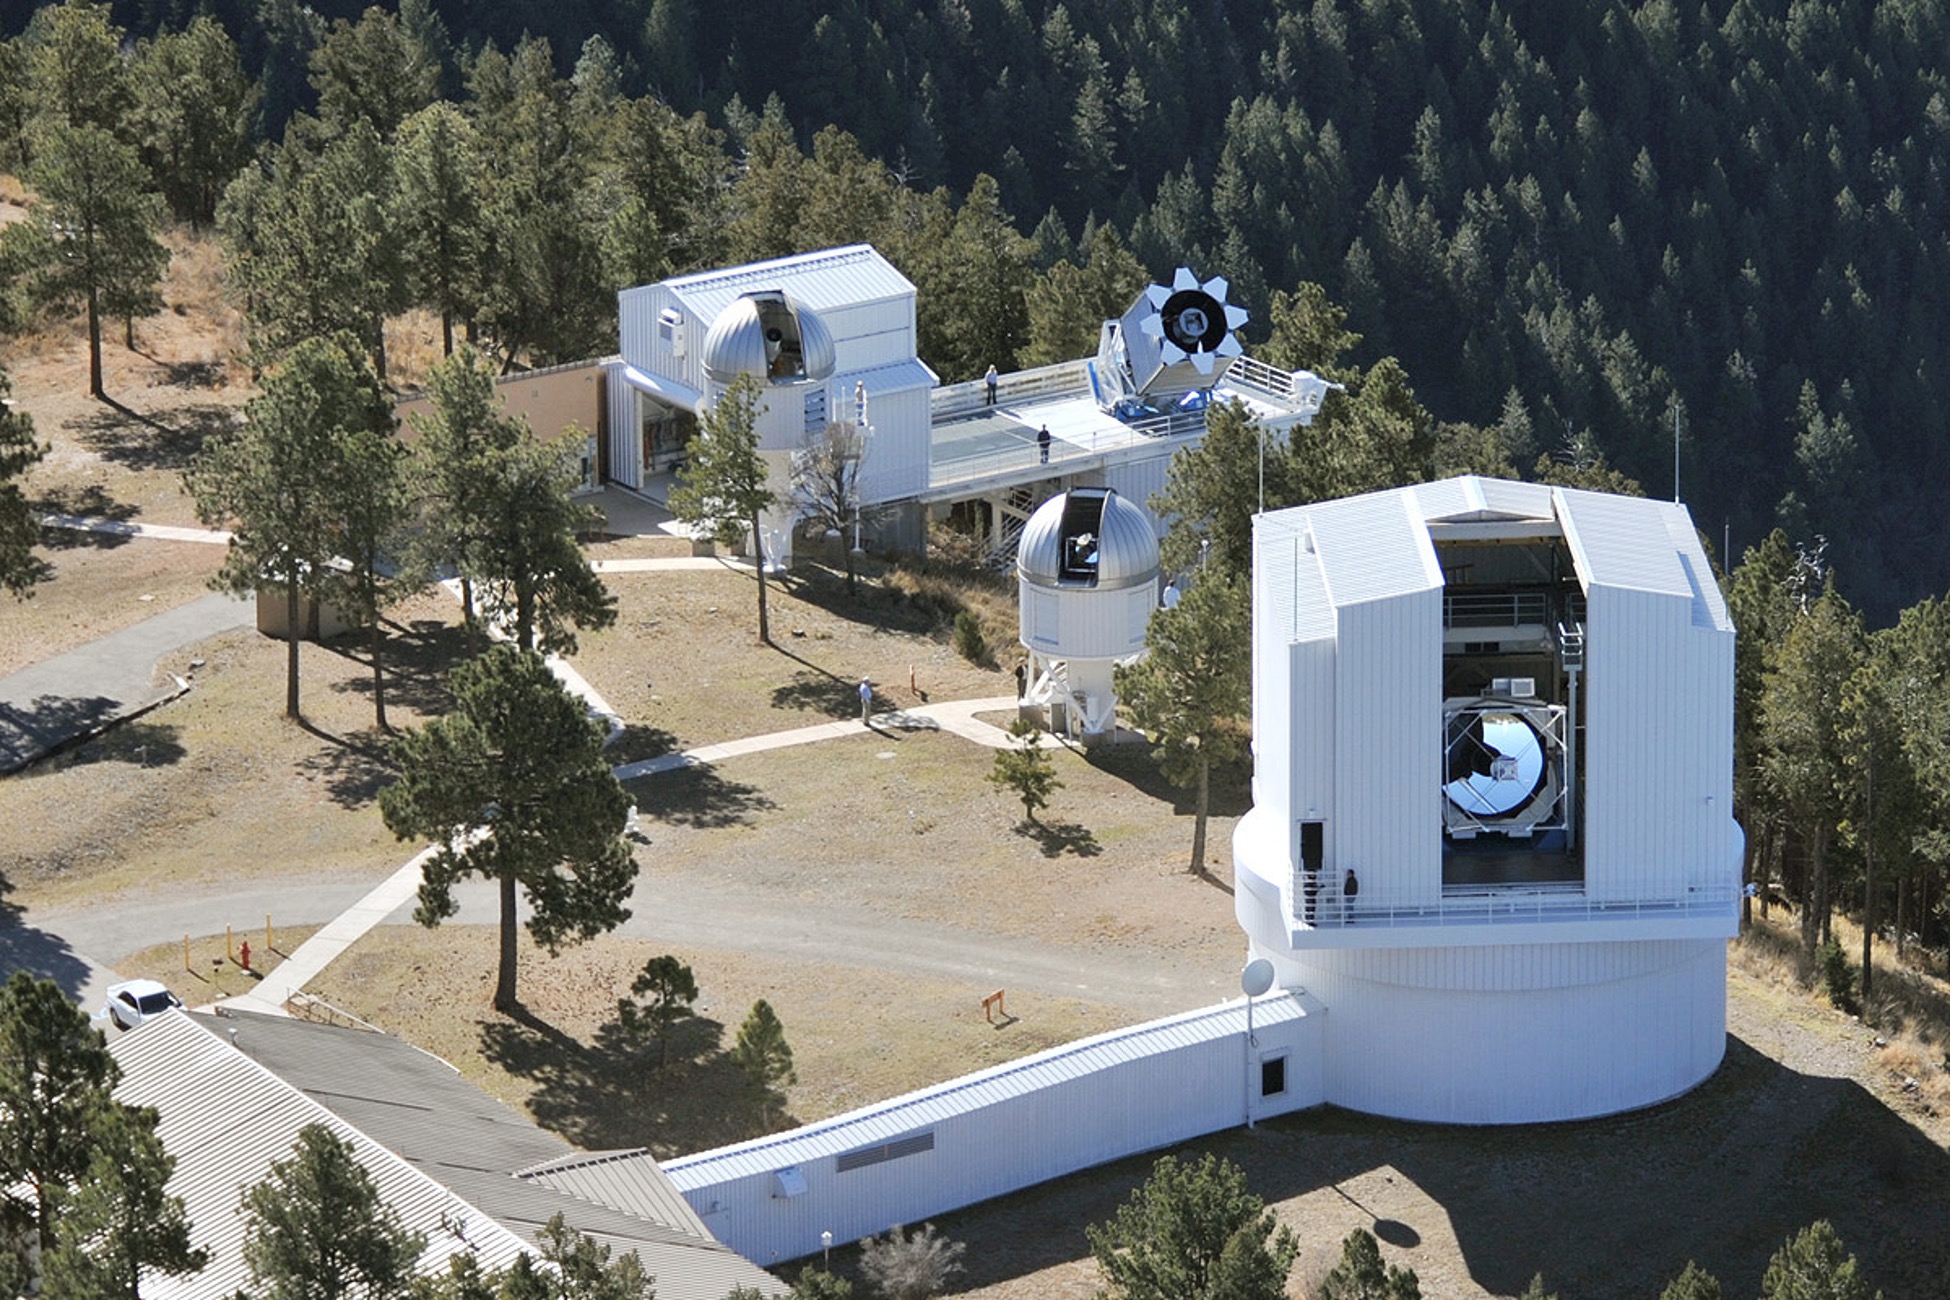 One of the NASA laser stations that will be used to range with Lunar Pathfinder is located at the Apache Point Observatory in New Mexico. The Apache Point station (pictured here) routinely ranges to the retroreflectors on the lunar surface with millimeter-level precision.